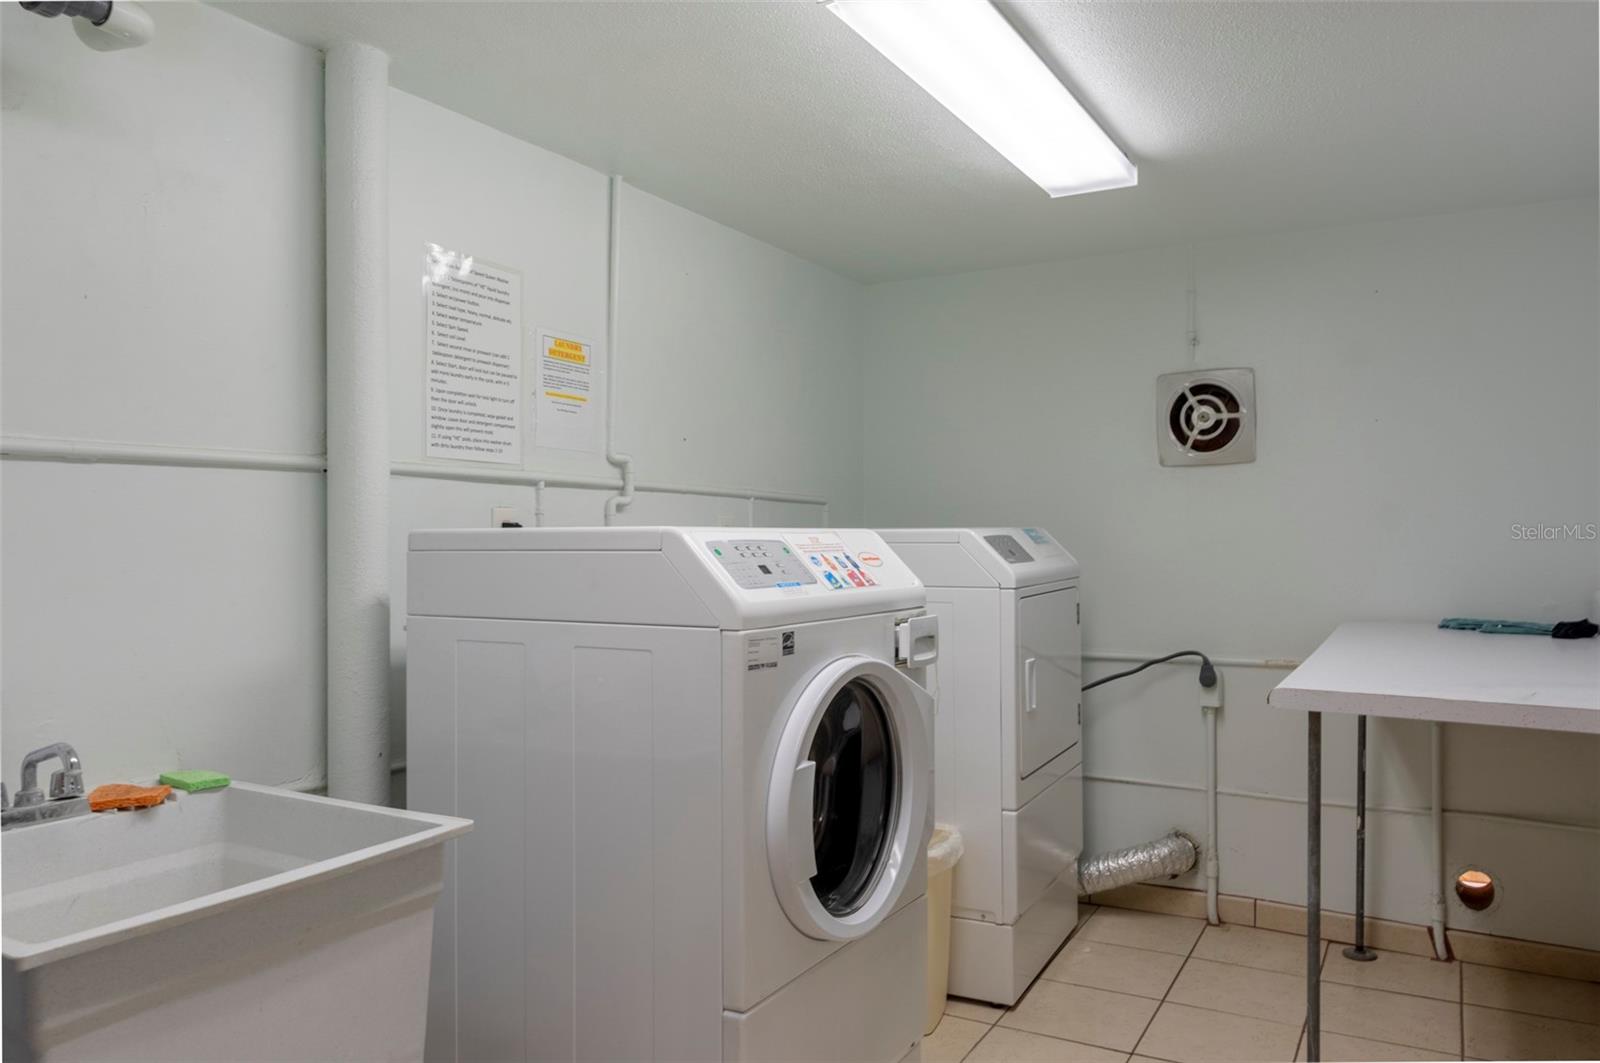 Laundry Room Down the Hall